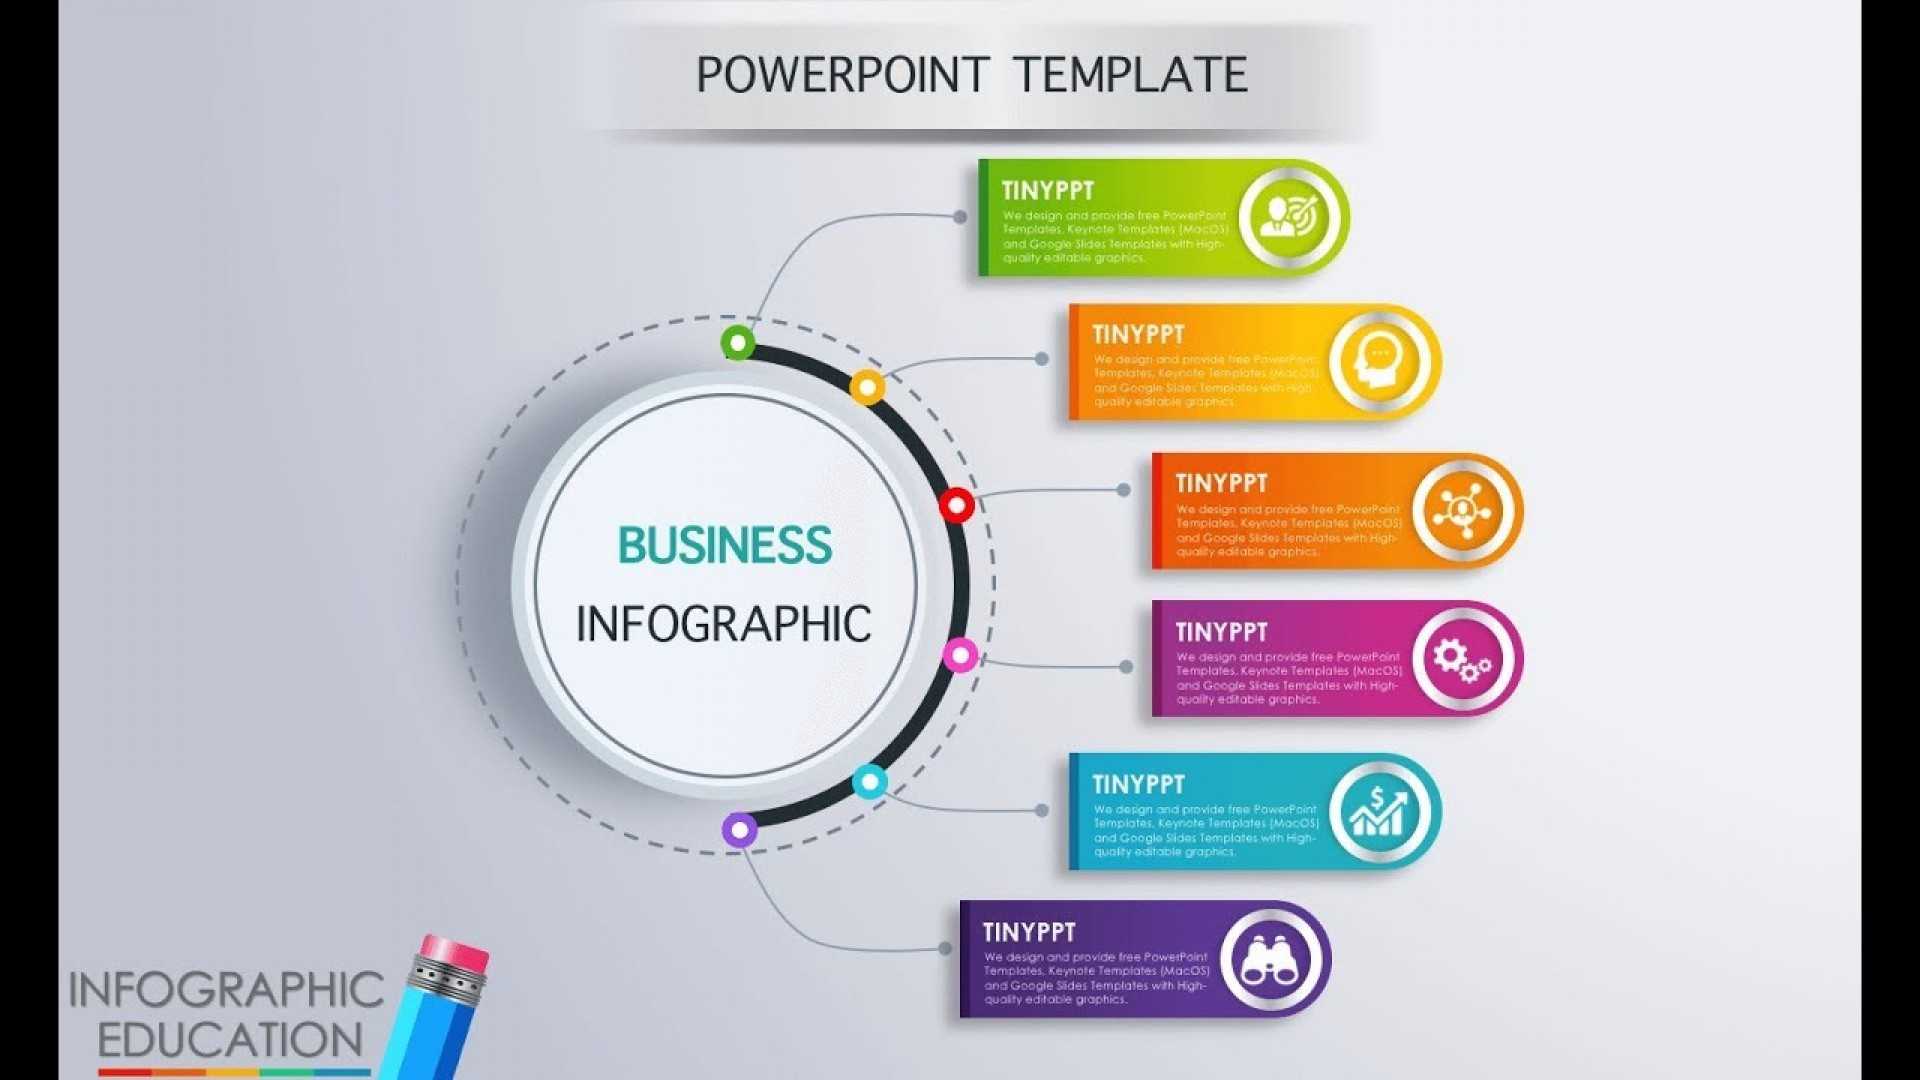 Animated Templates For Powerpoint Presentation Designs Free Pertaining To Powerpoint Presentation Animation Templates